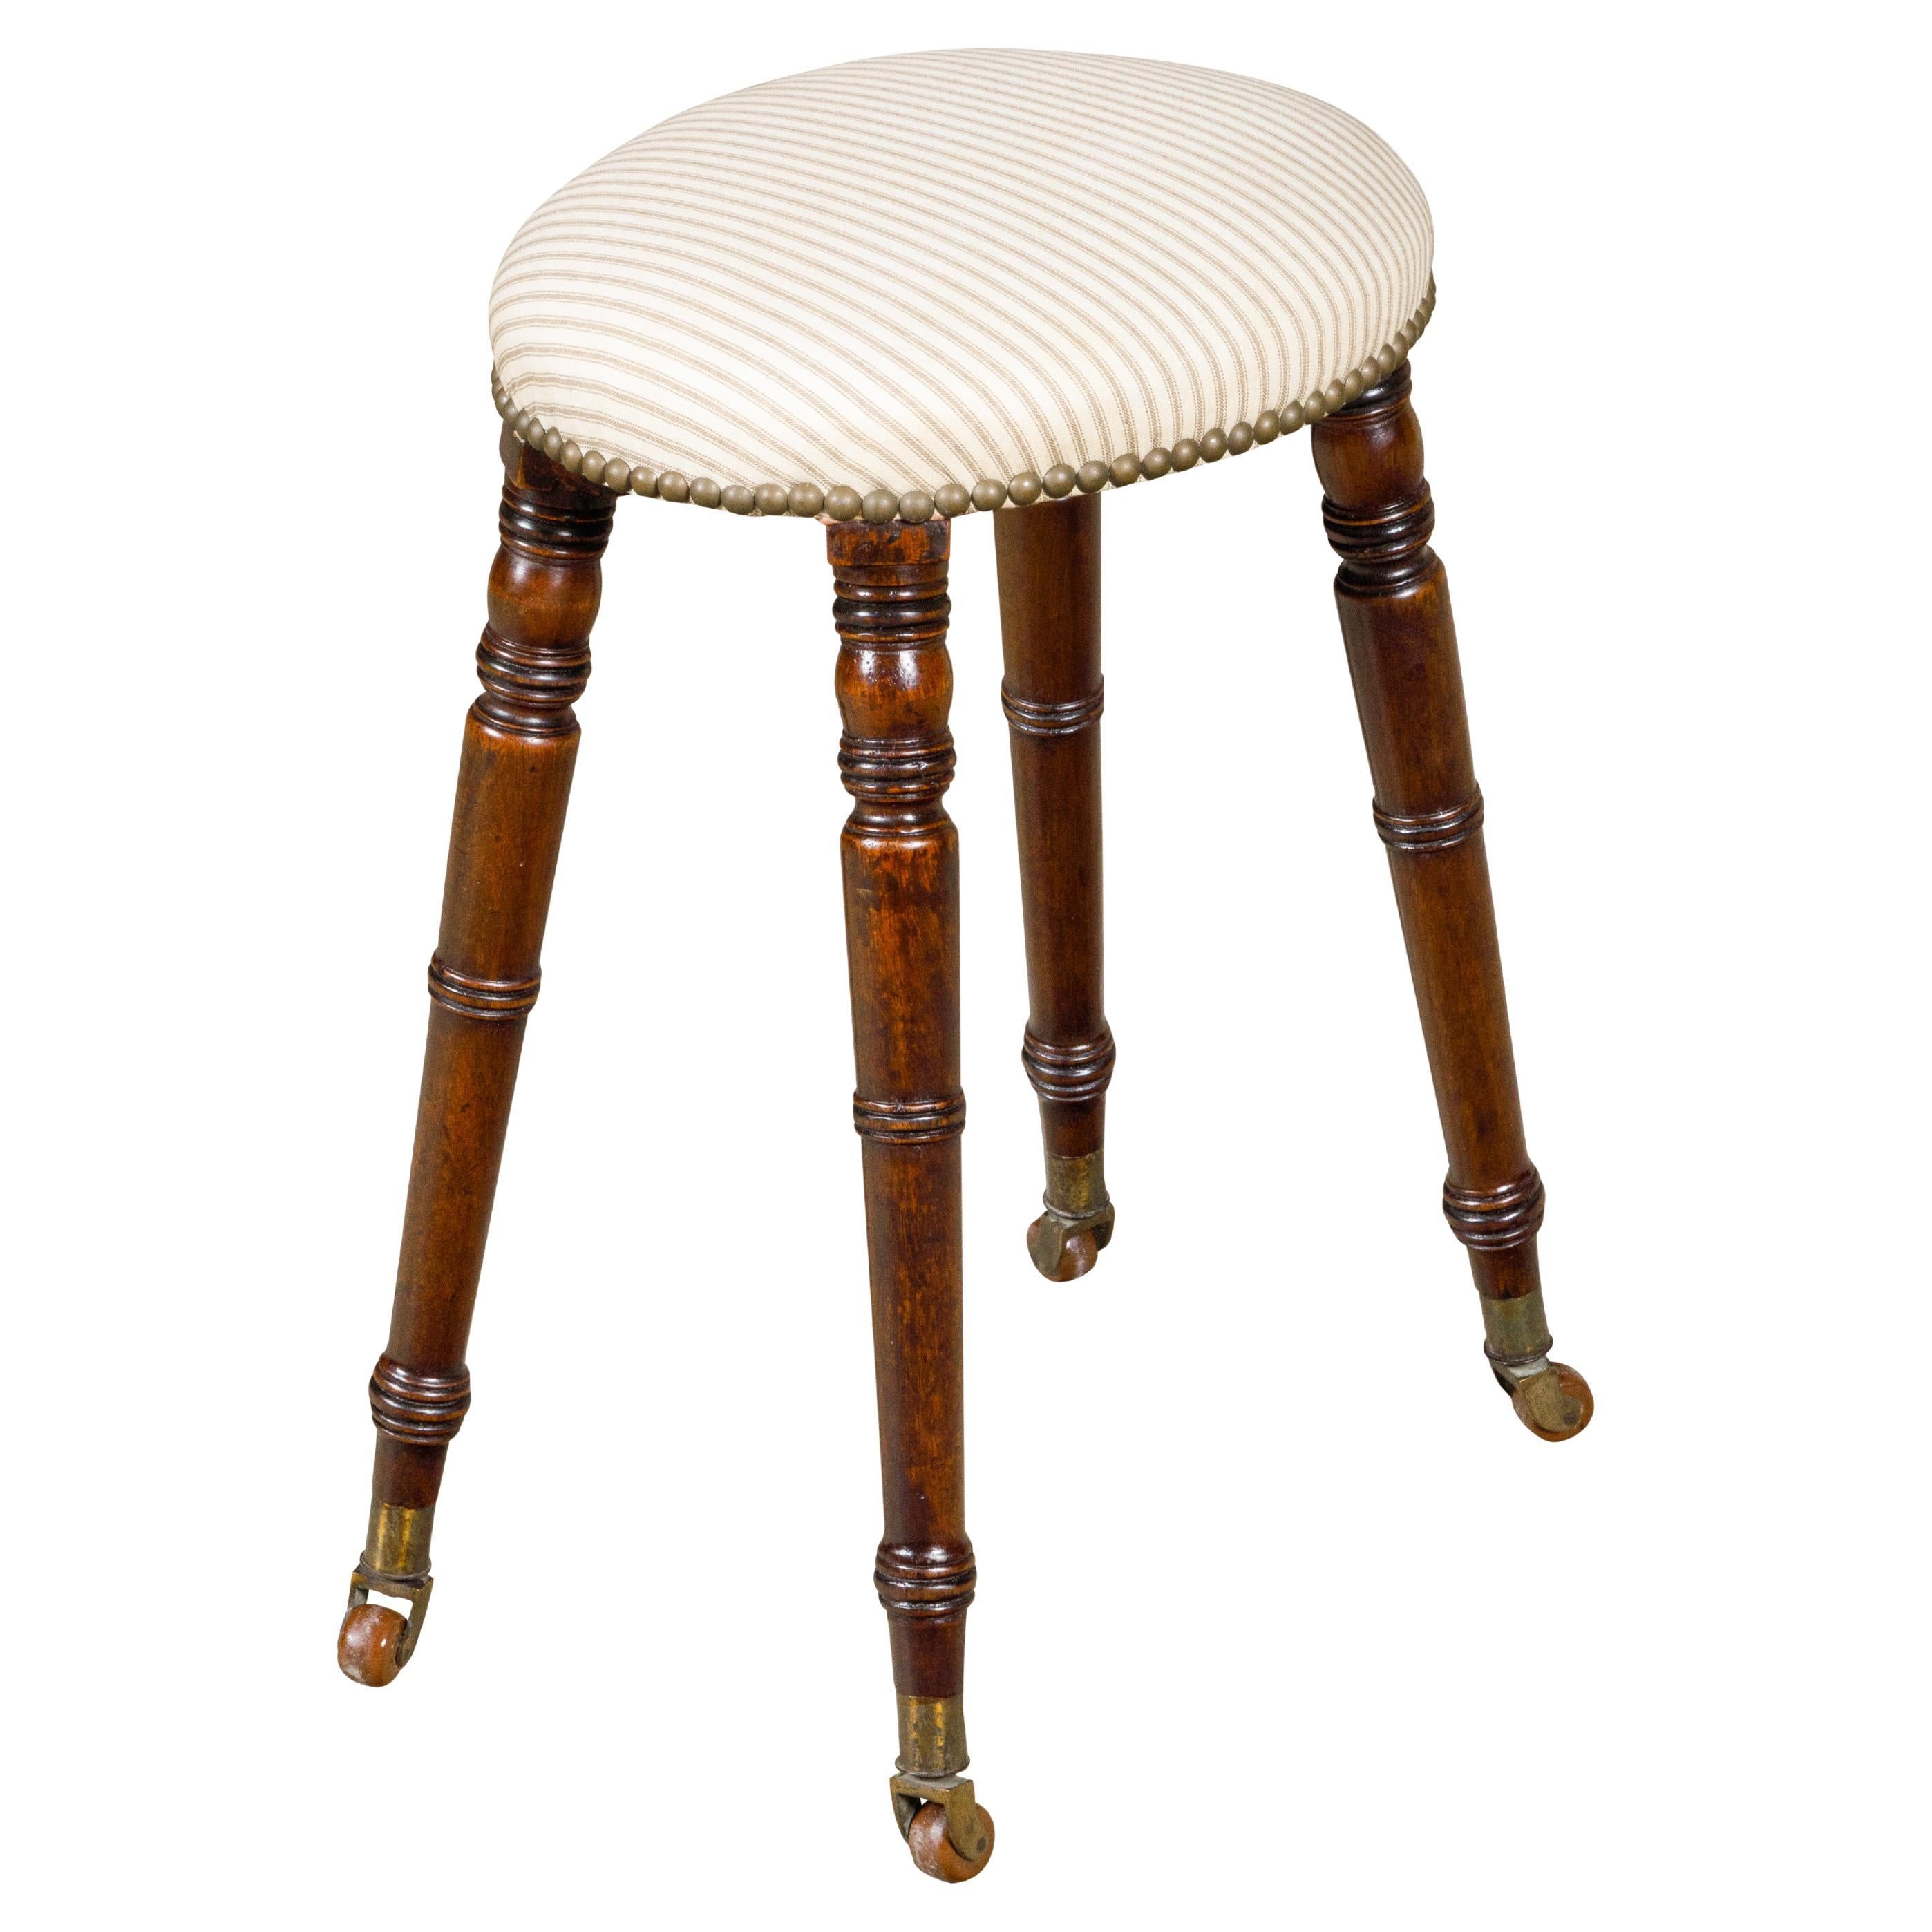 English Turned Oak 19th Century Stool on Casters with Oval Upholstered Seat